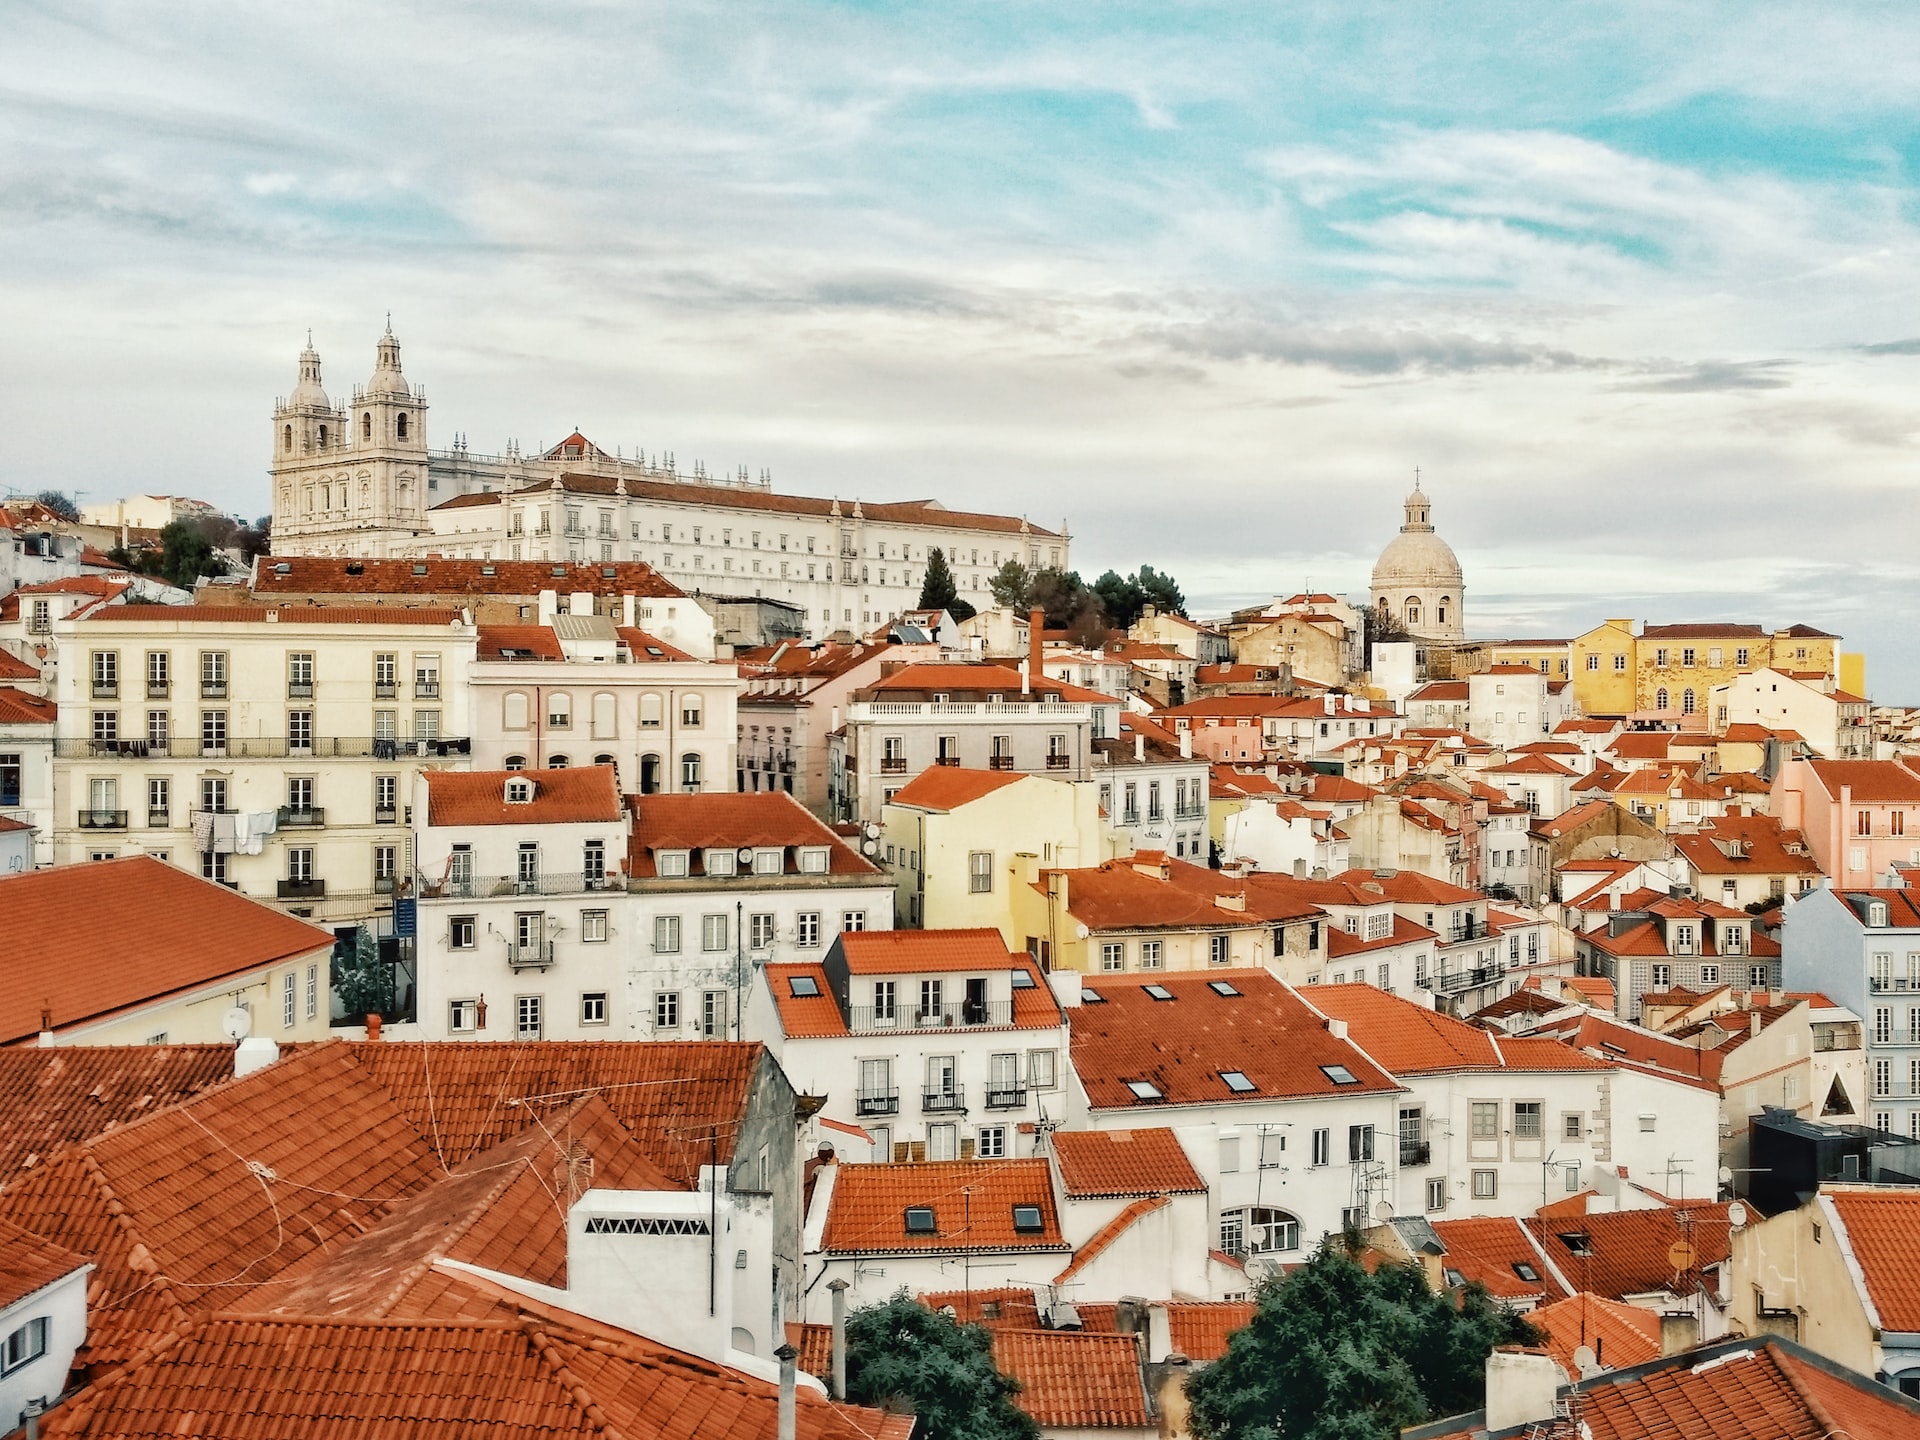 Looking out over Alfama, Lisbon.